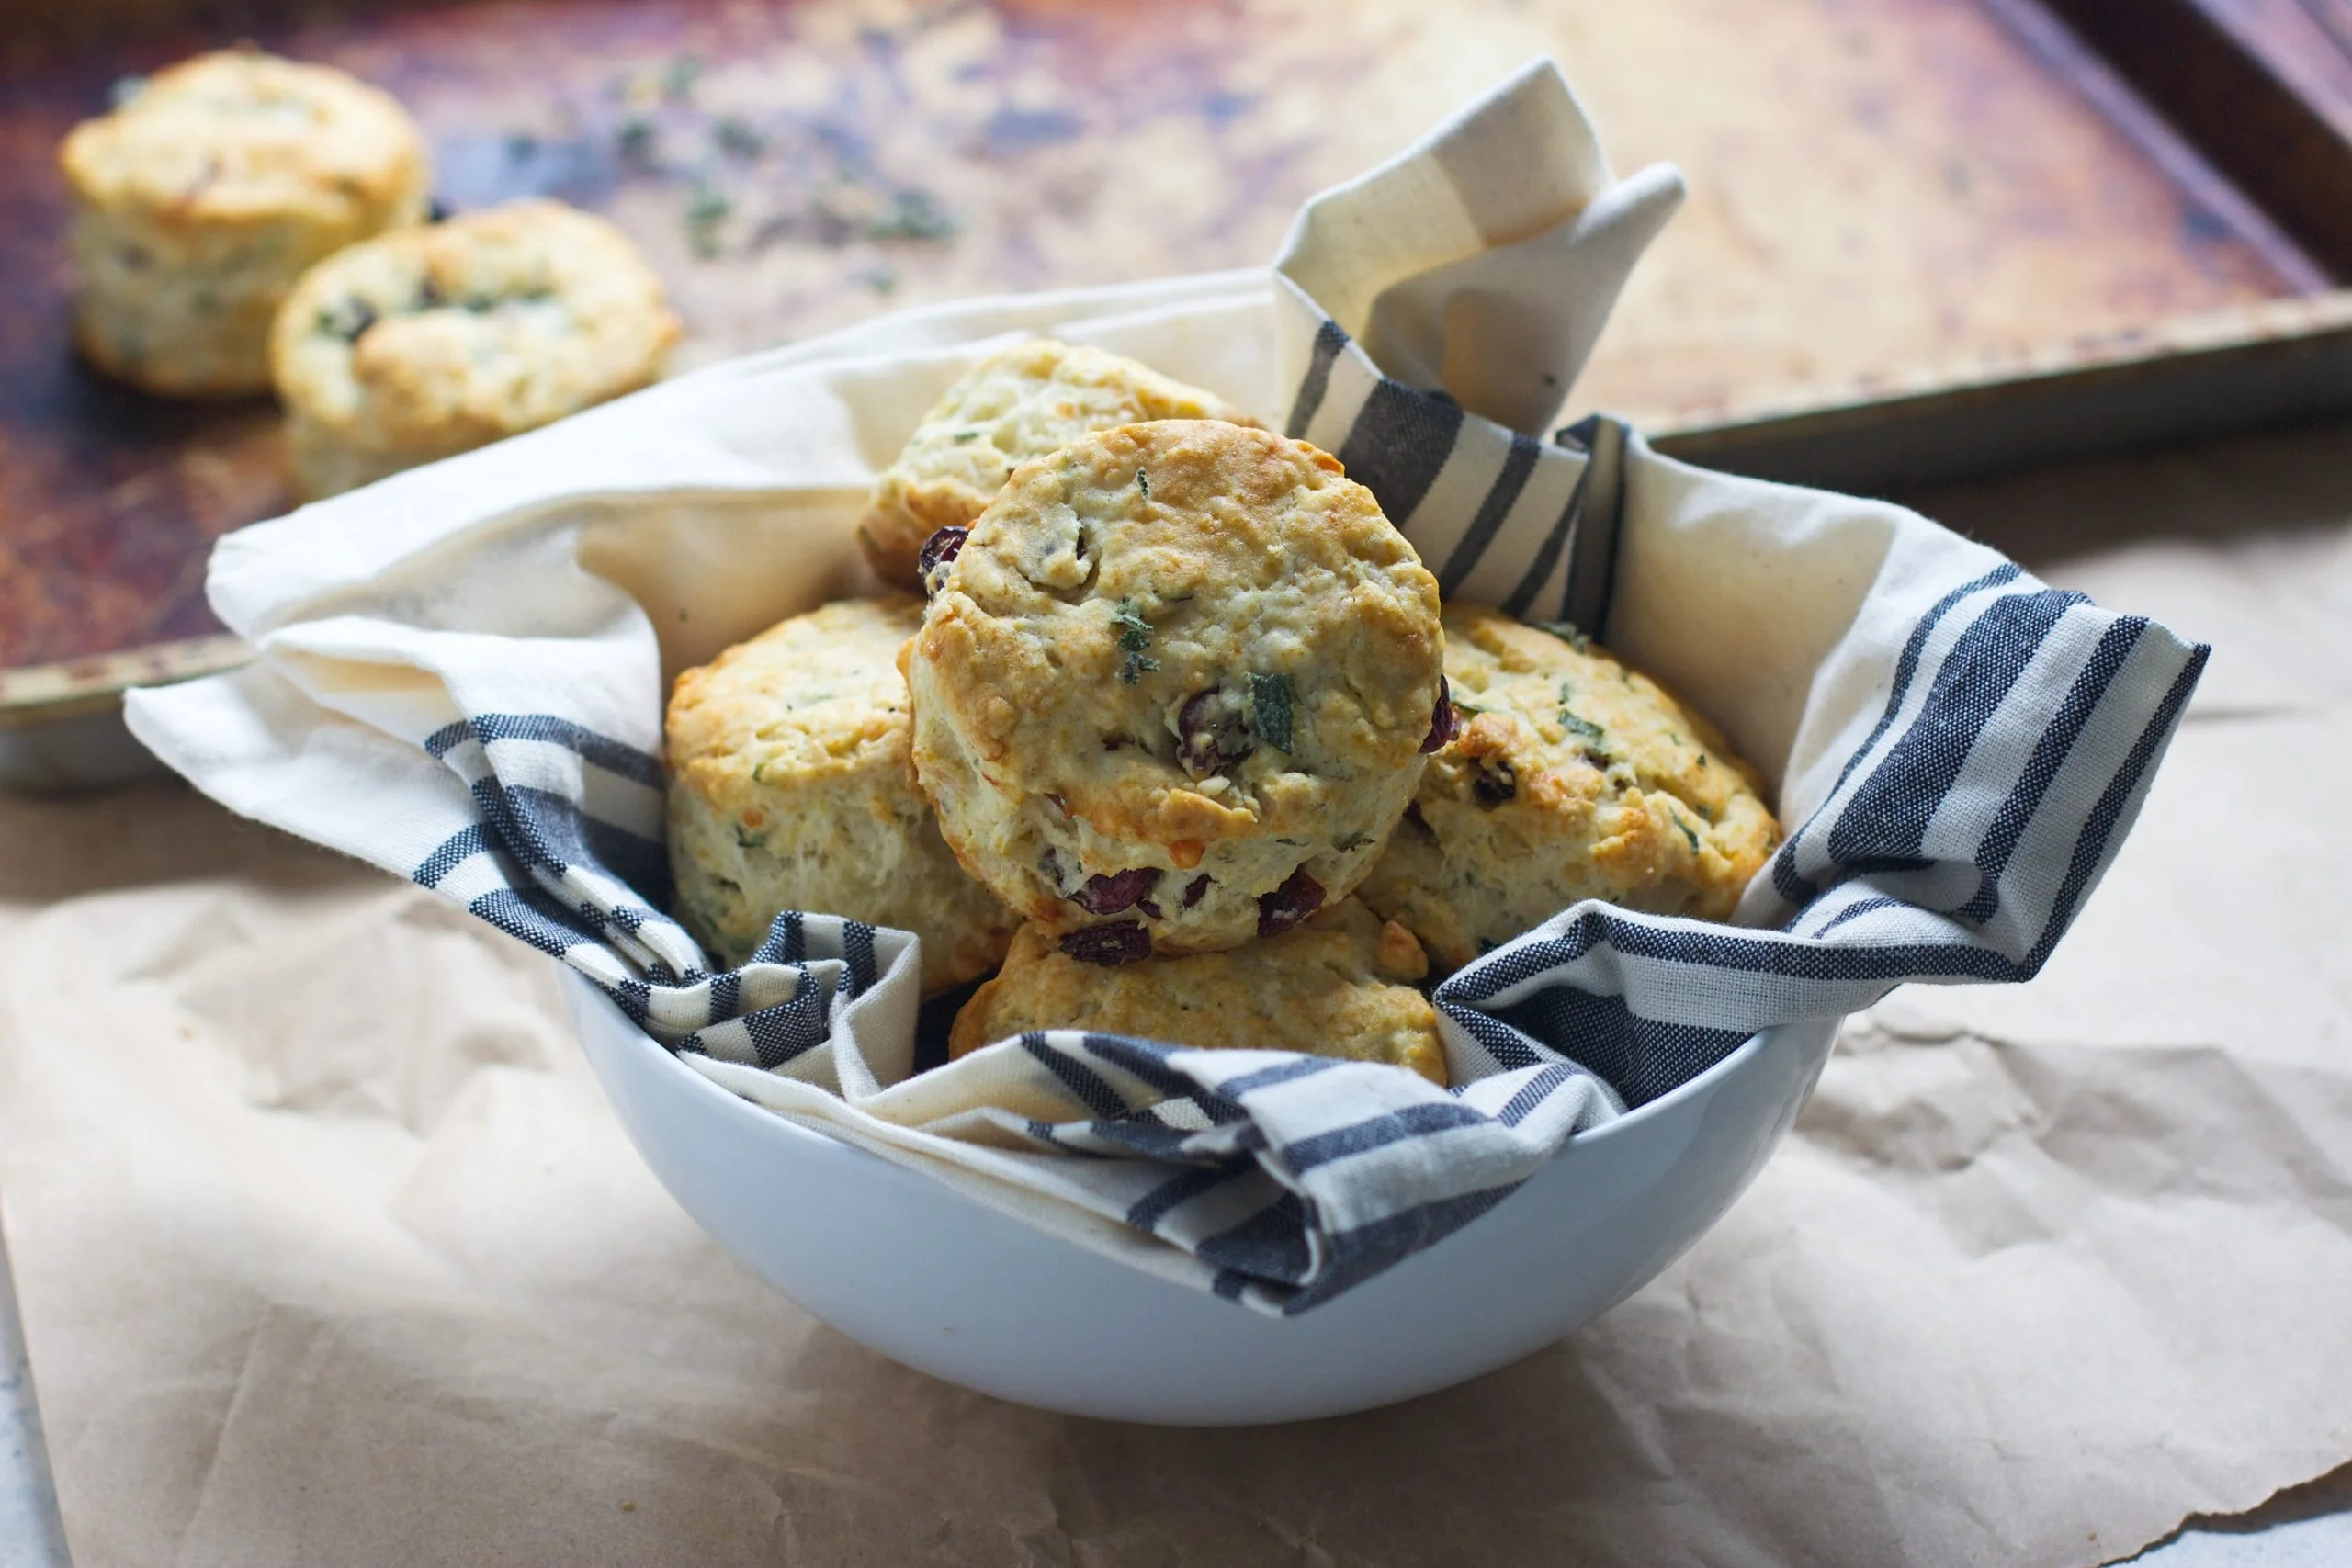 Super Easy Gruyere, Cranberrya and Sage Buttermilk Biscuits - The perfect alternative to rolls on your holiday table!